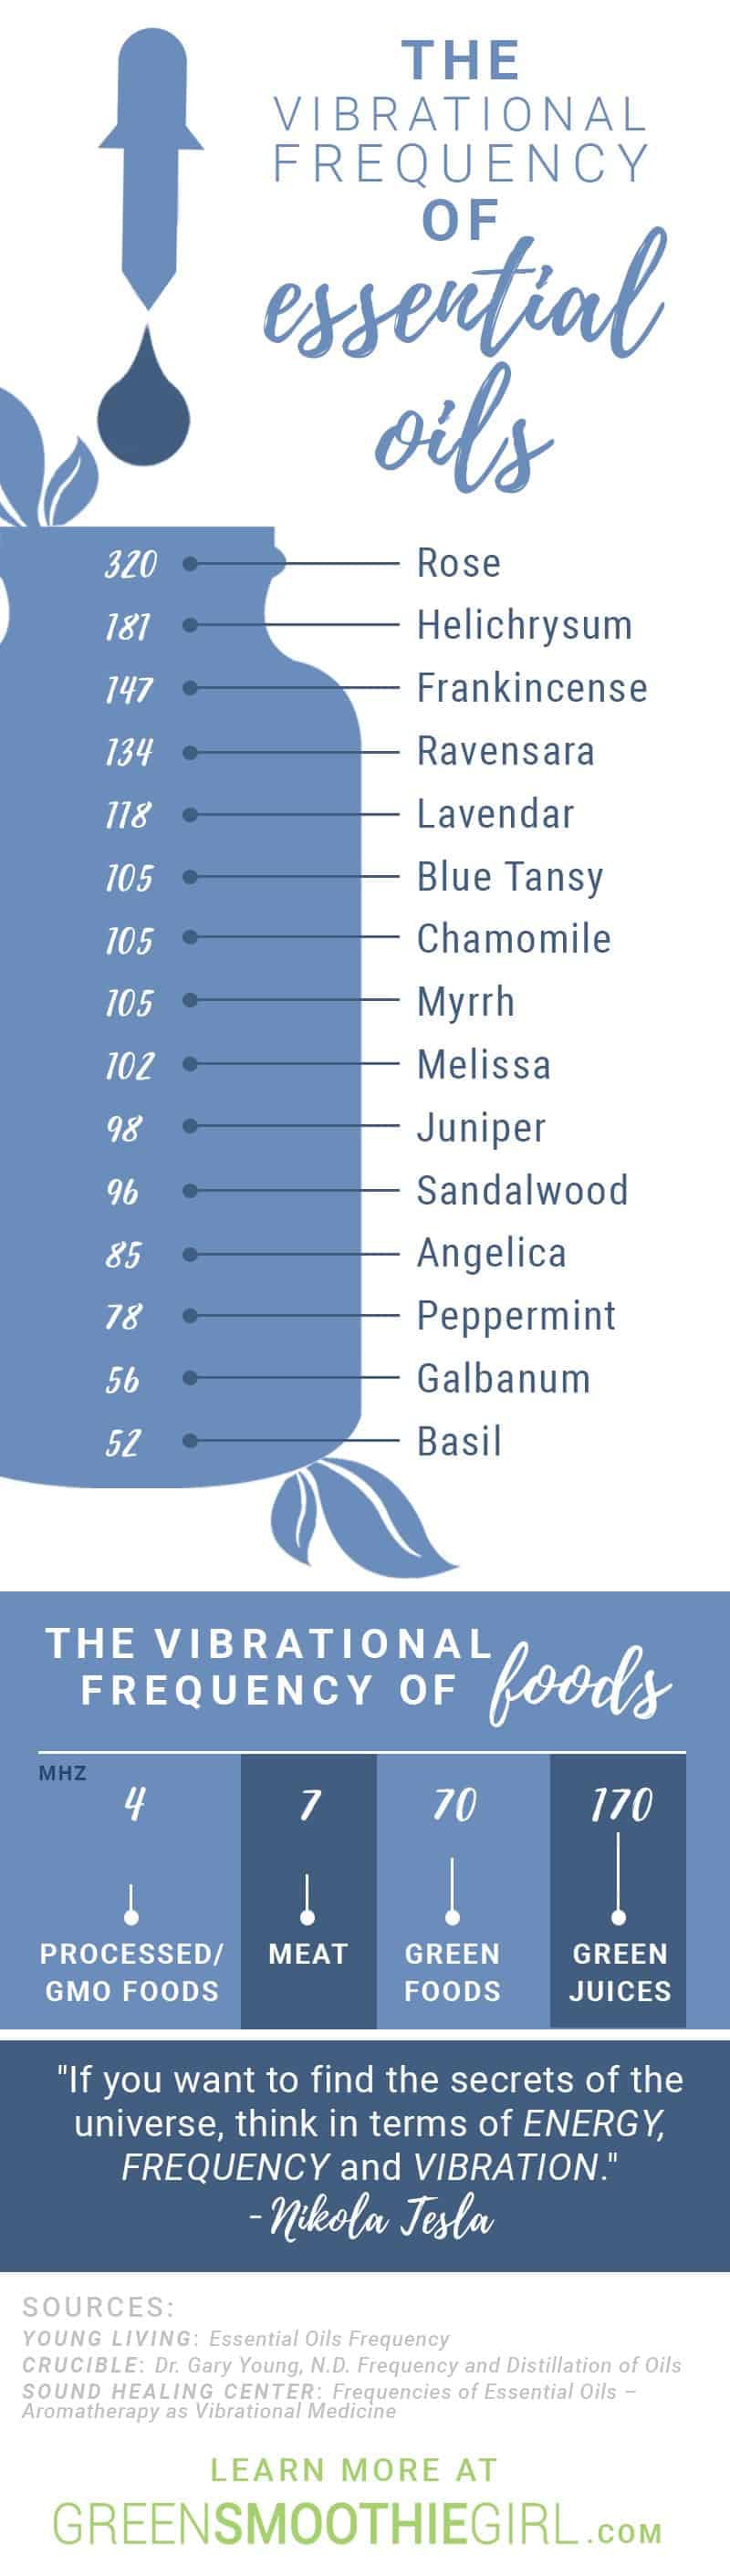 An Overview of the Vibrational Frequency of Essential Oils